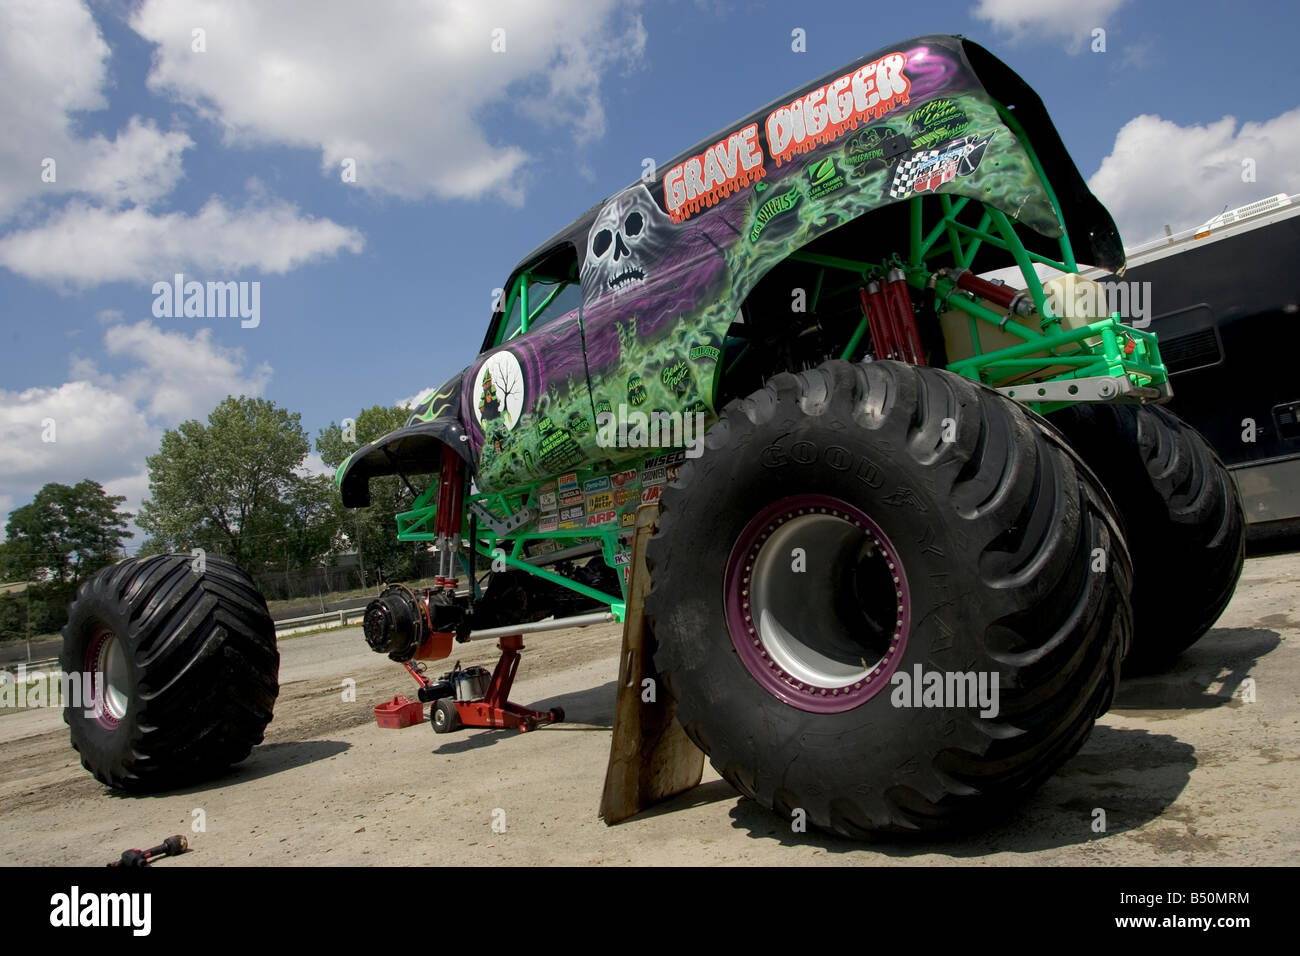 MONSTER TRUCK Grave Digger prima del Monster Truck Challenge all'Orange County Fair di NY Speedway Foto Stock